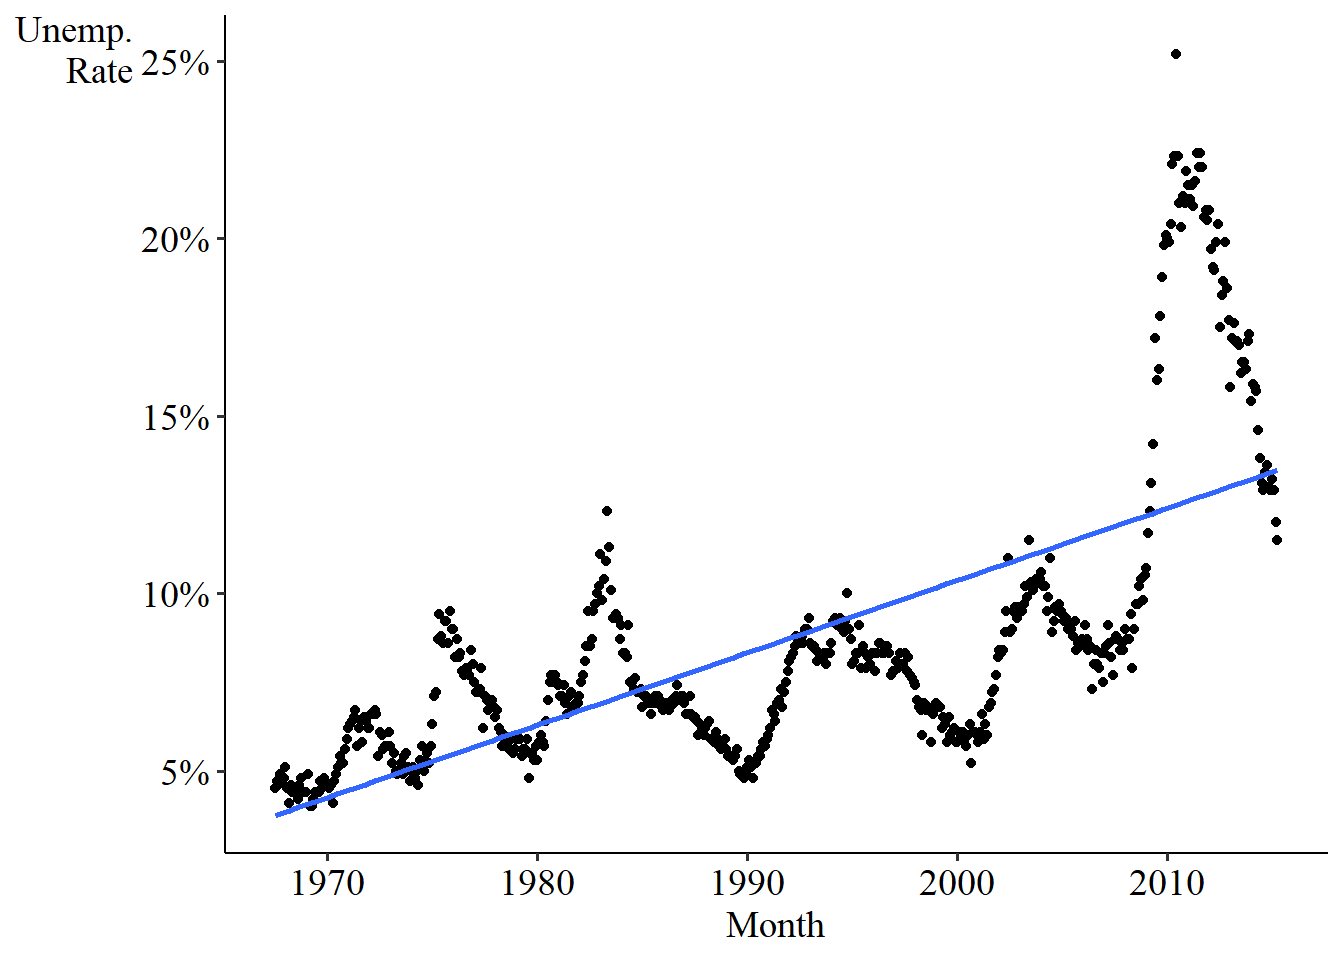 A graph of the US unemployment rate over time with a best-fit line, showing strong time trends flowing above the best fit, then below it, and so on.